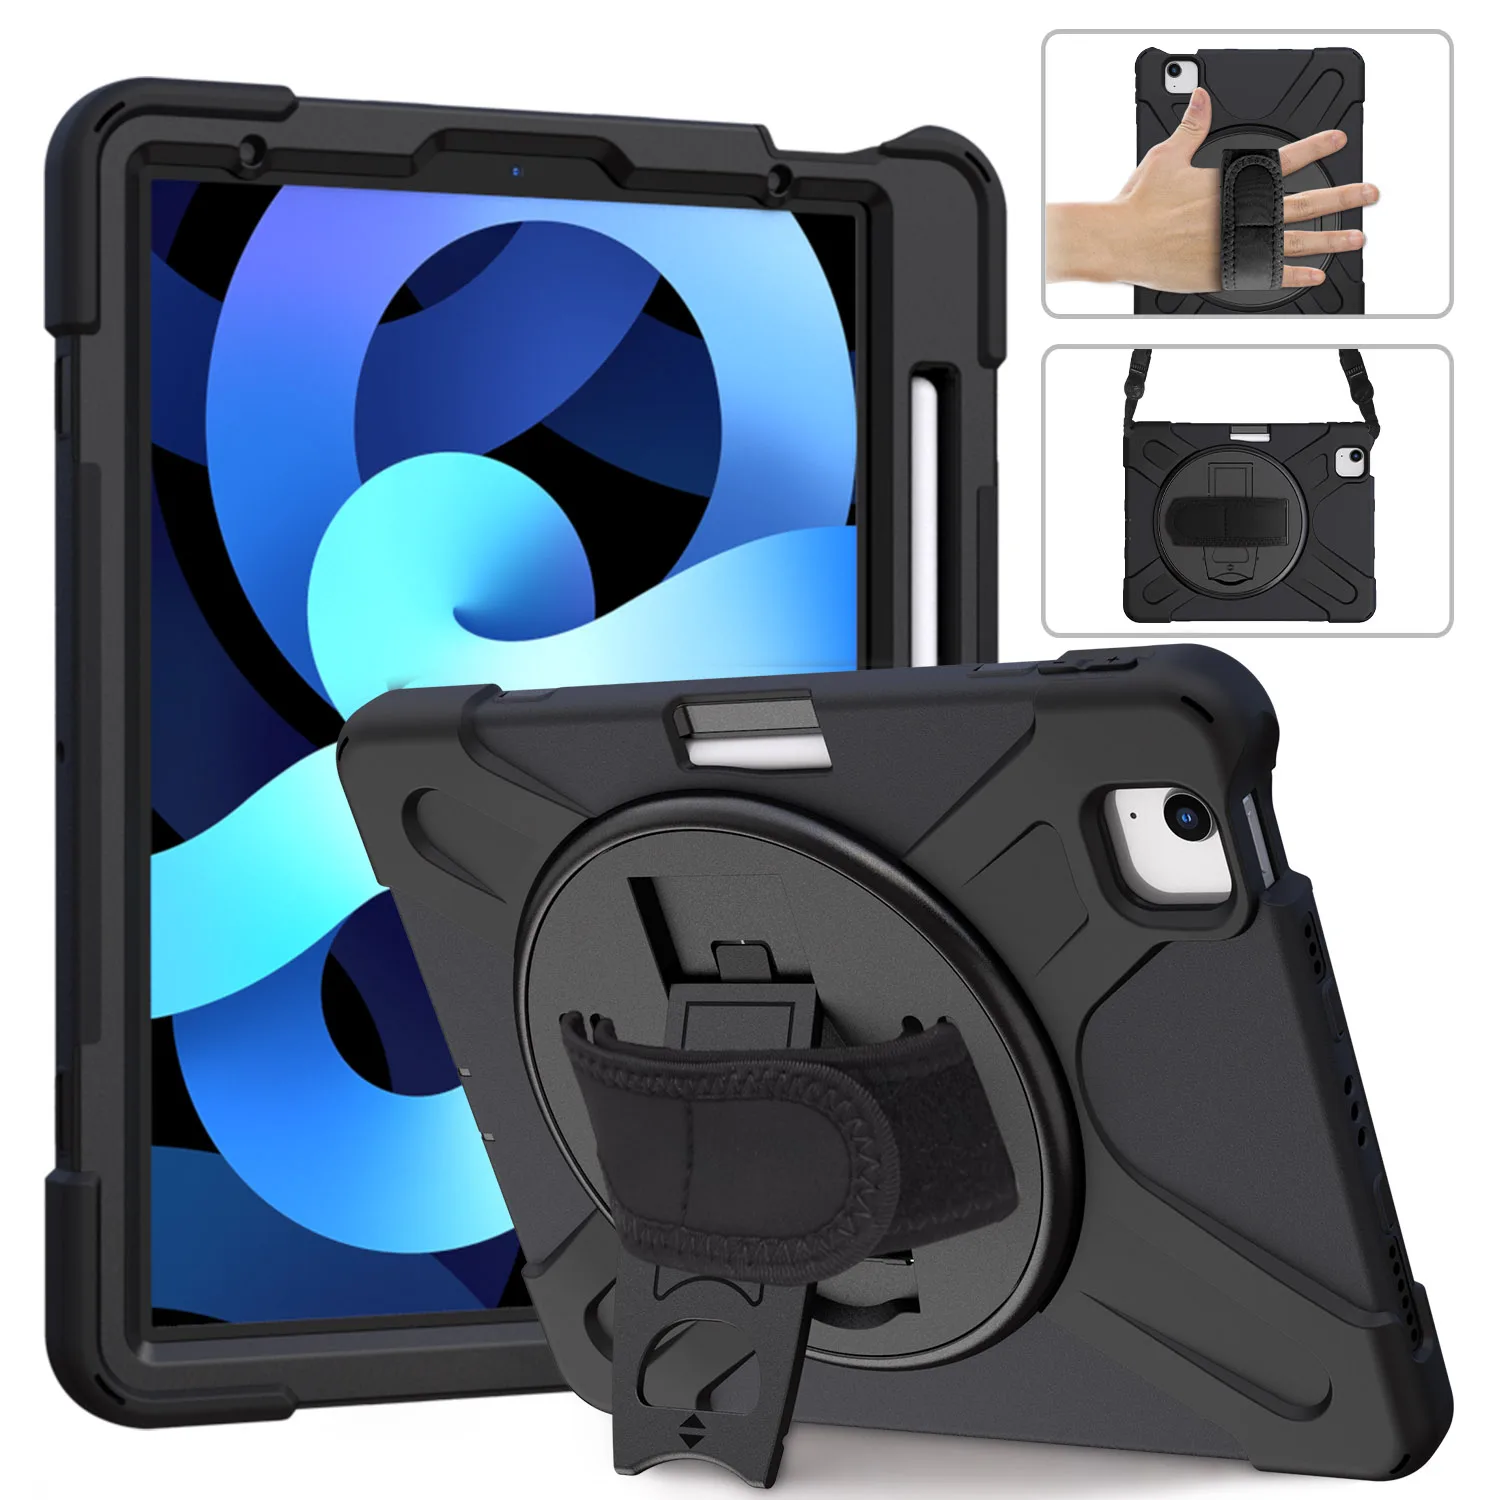 

HXCASE For Sumsung Tab S7 S7 Plus 11 12.4 Shoulder Strap Cases T870 T875 T970 T975 T976 with 360 Rotation Kickstand Hand Straps